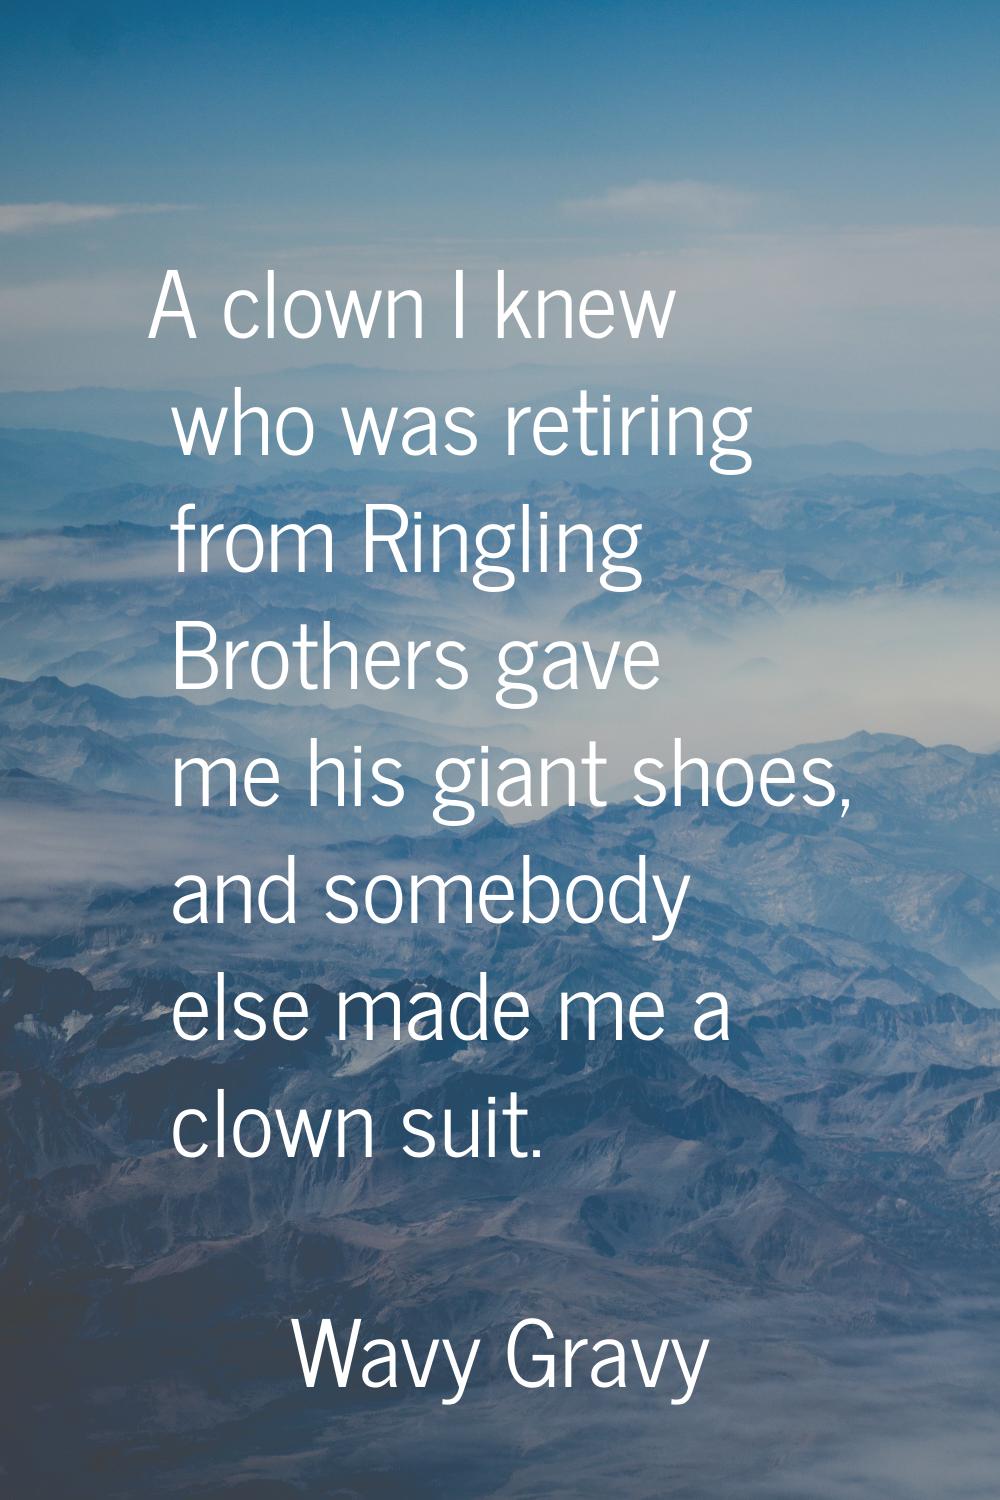 A clown I knew who was retiring from Ringling Brothers gave me his giant shoes, and somebody else m